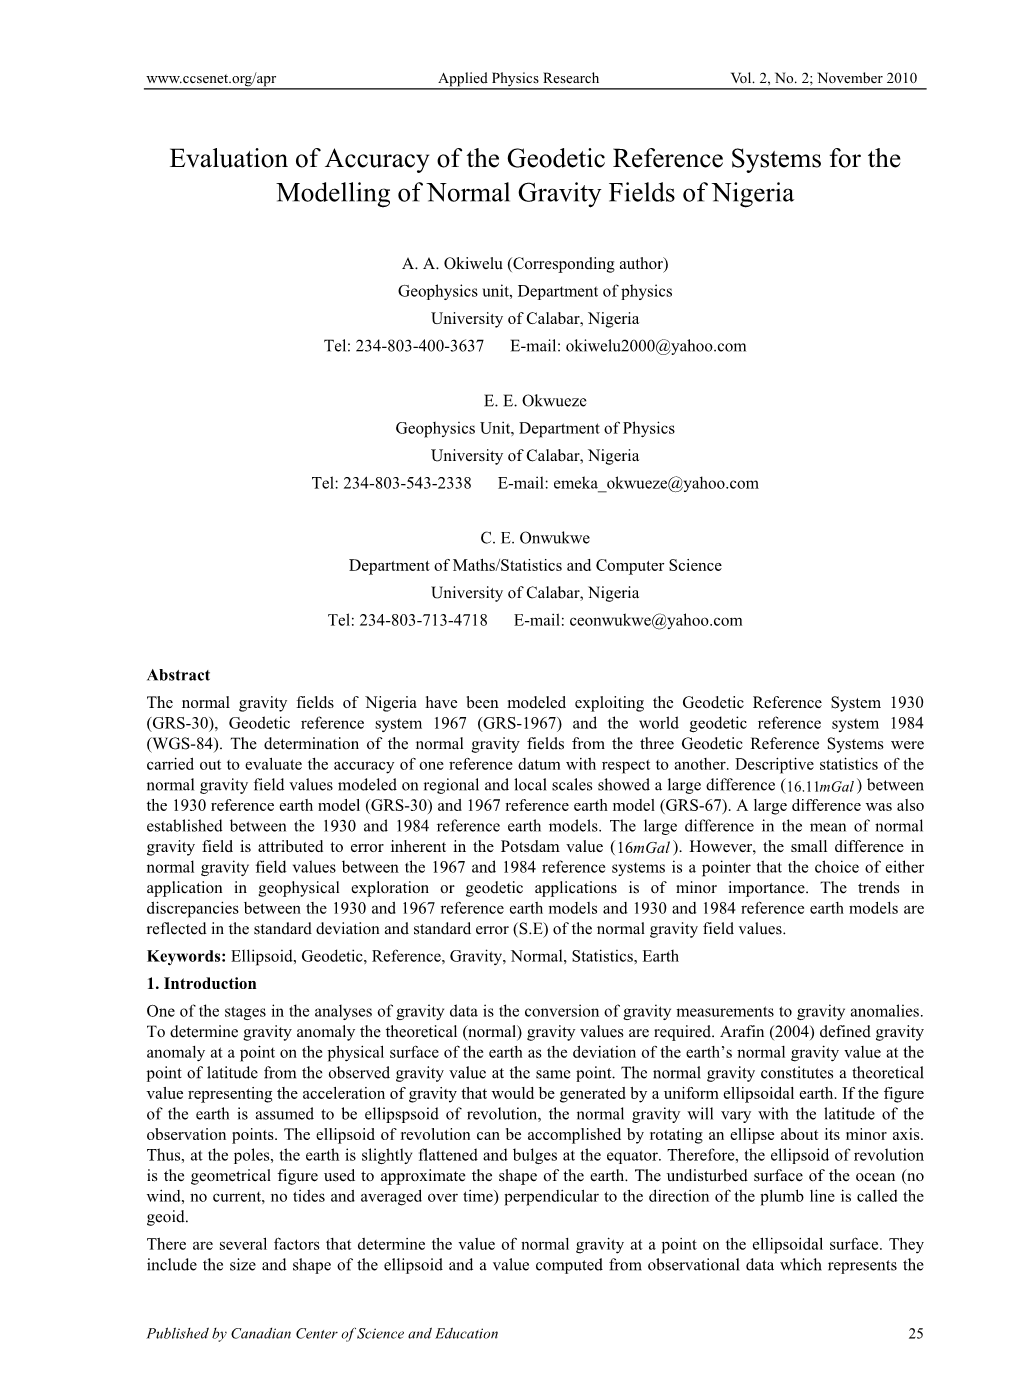 Evaluation of Accuracy of the Geodetic Reference Systems for the Modelling of Normal Gravity Fields of Nigeria